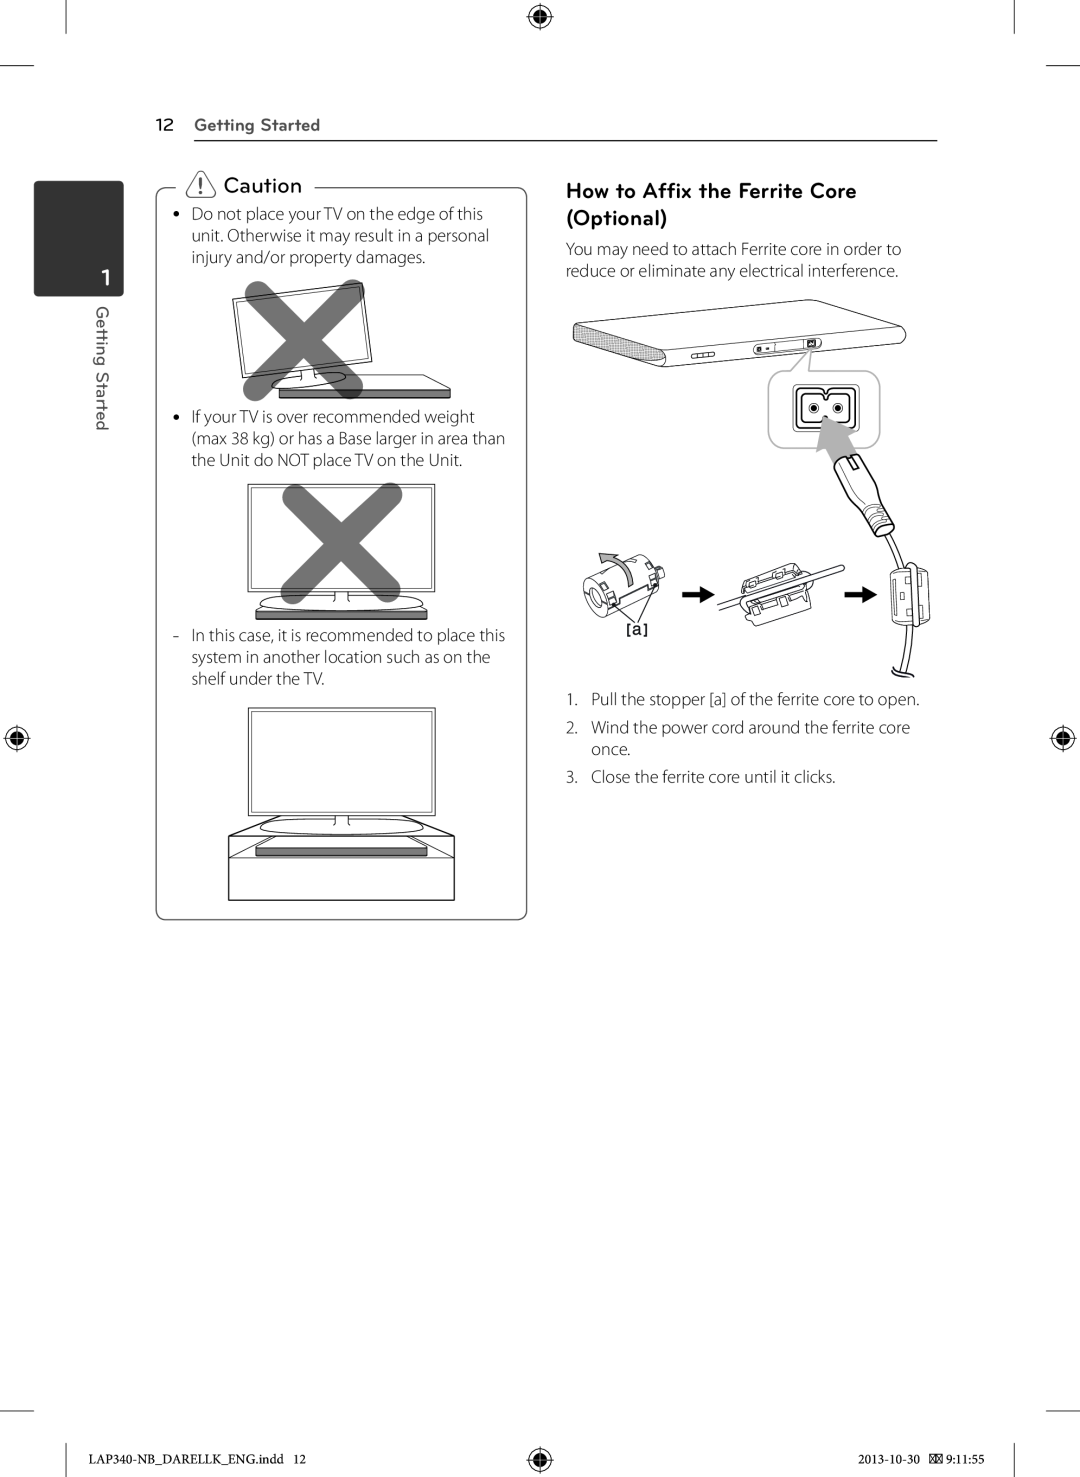 LG Electronics LAP340 owner manual How to Affix the Ferrite Core Optional, Getting Started 